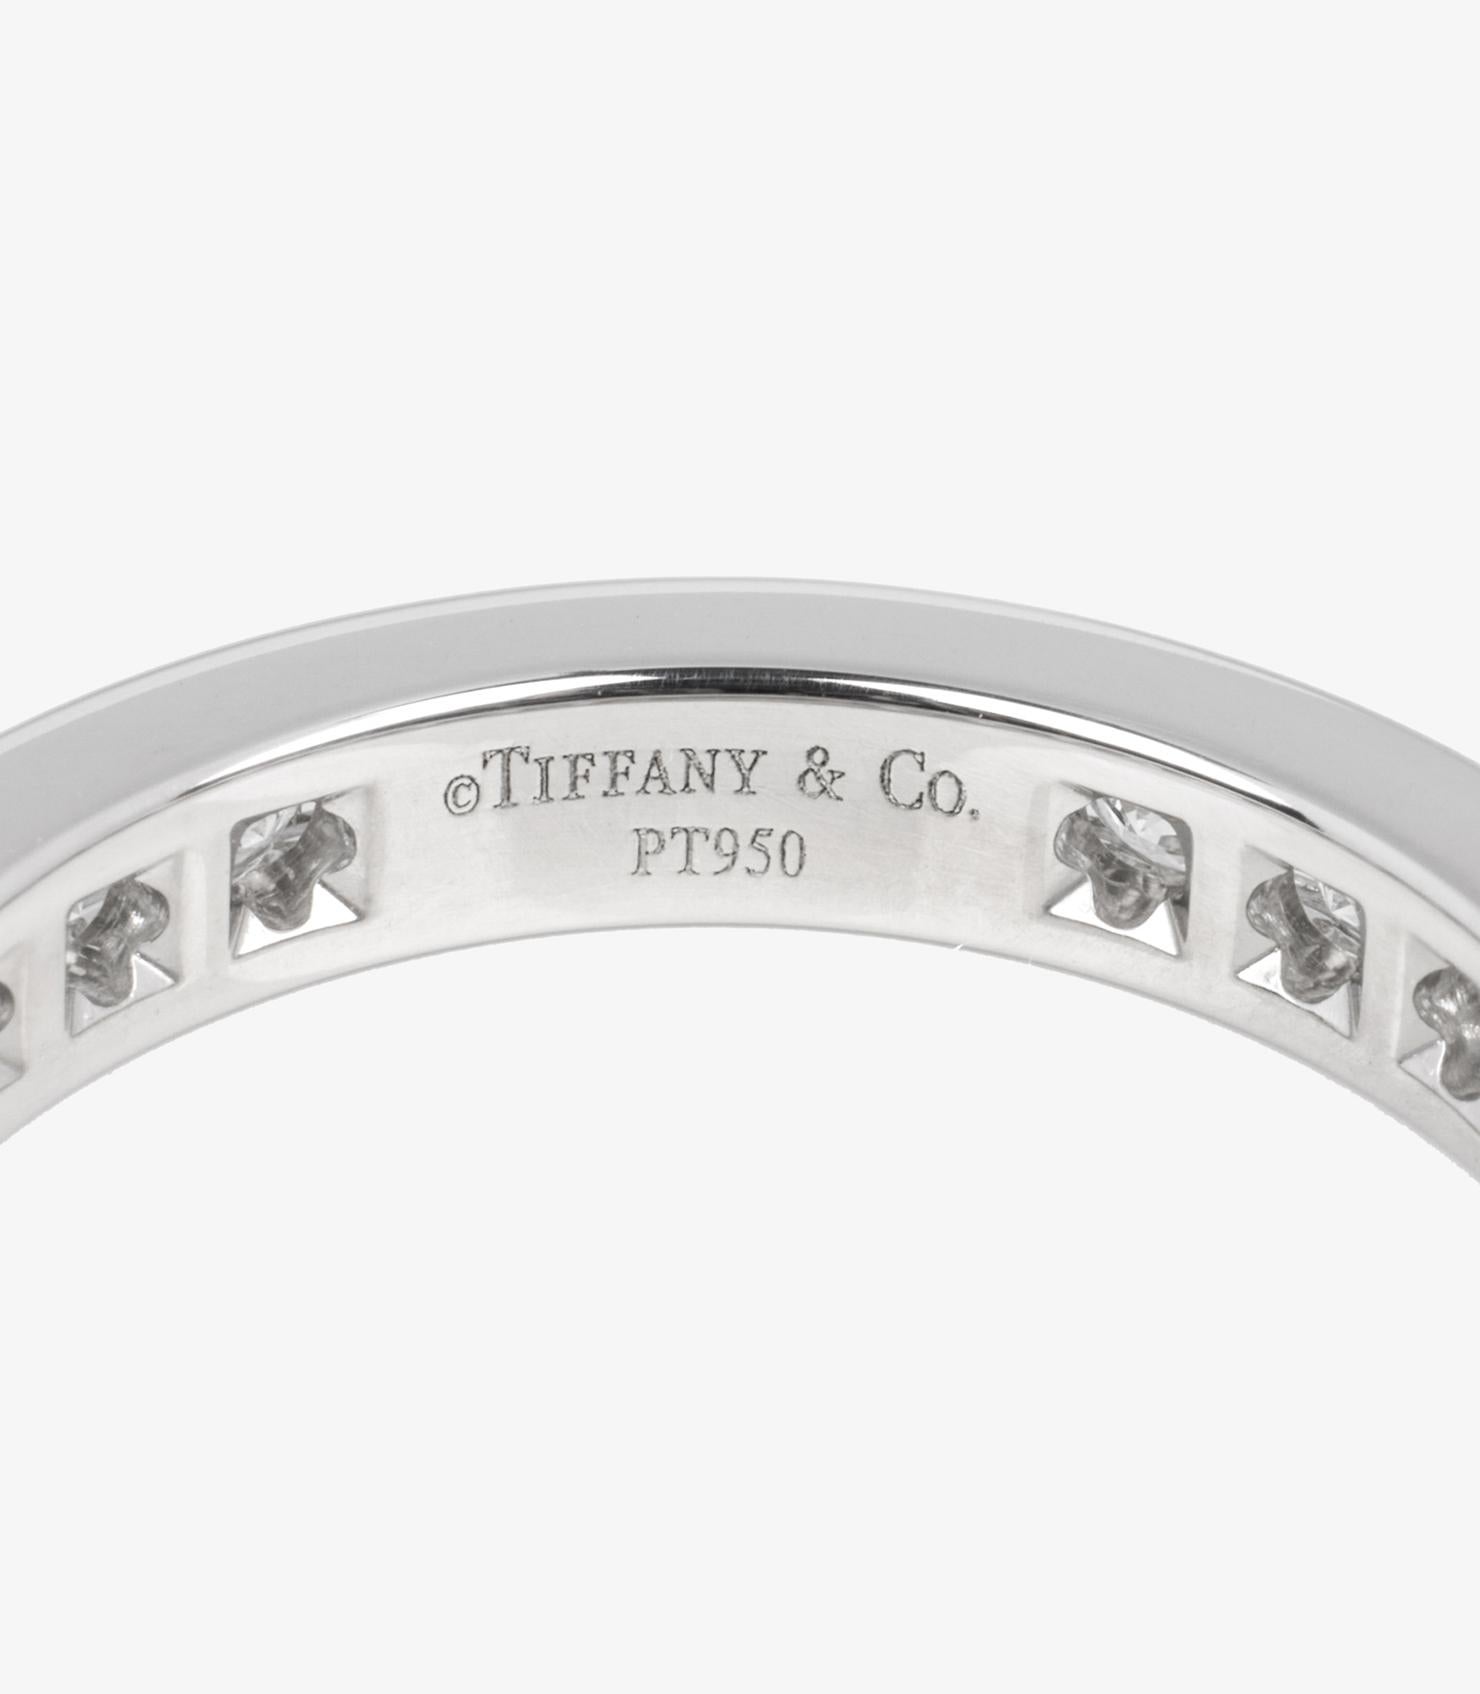 Tiffany & Co. Brilliant Cut Diamond Platinum Full Eternity Ring In Excellent Condition For Sale In Bishop's Stortford, Hertfordshire